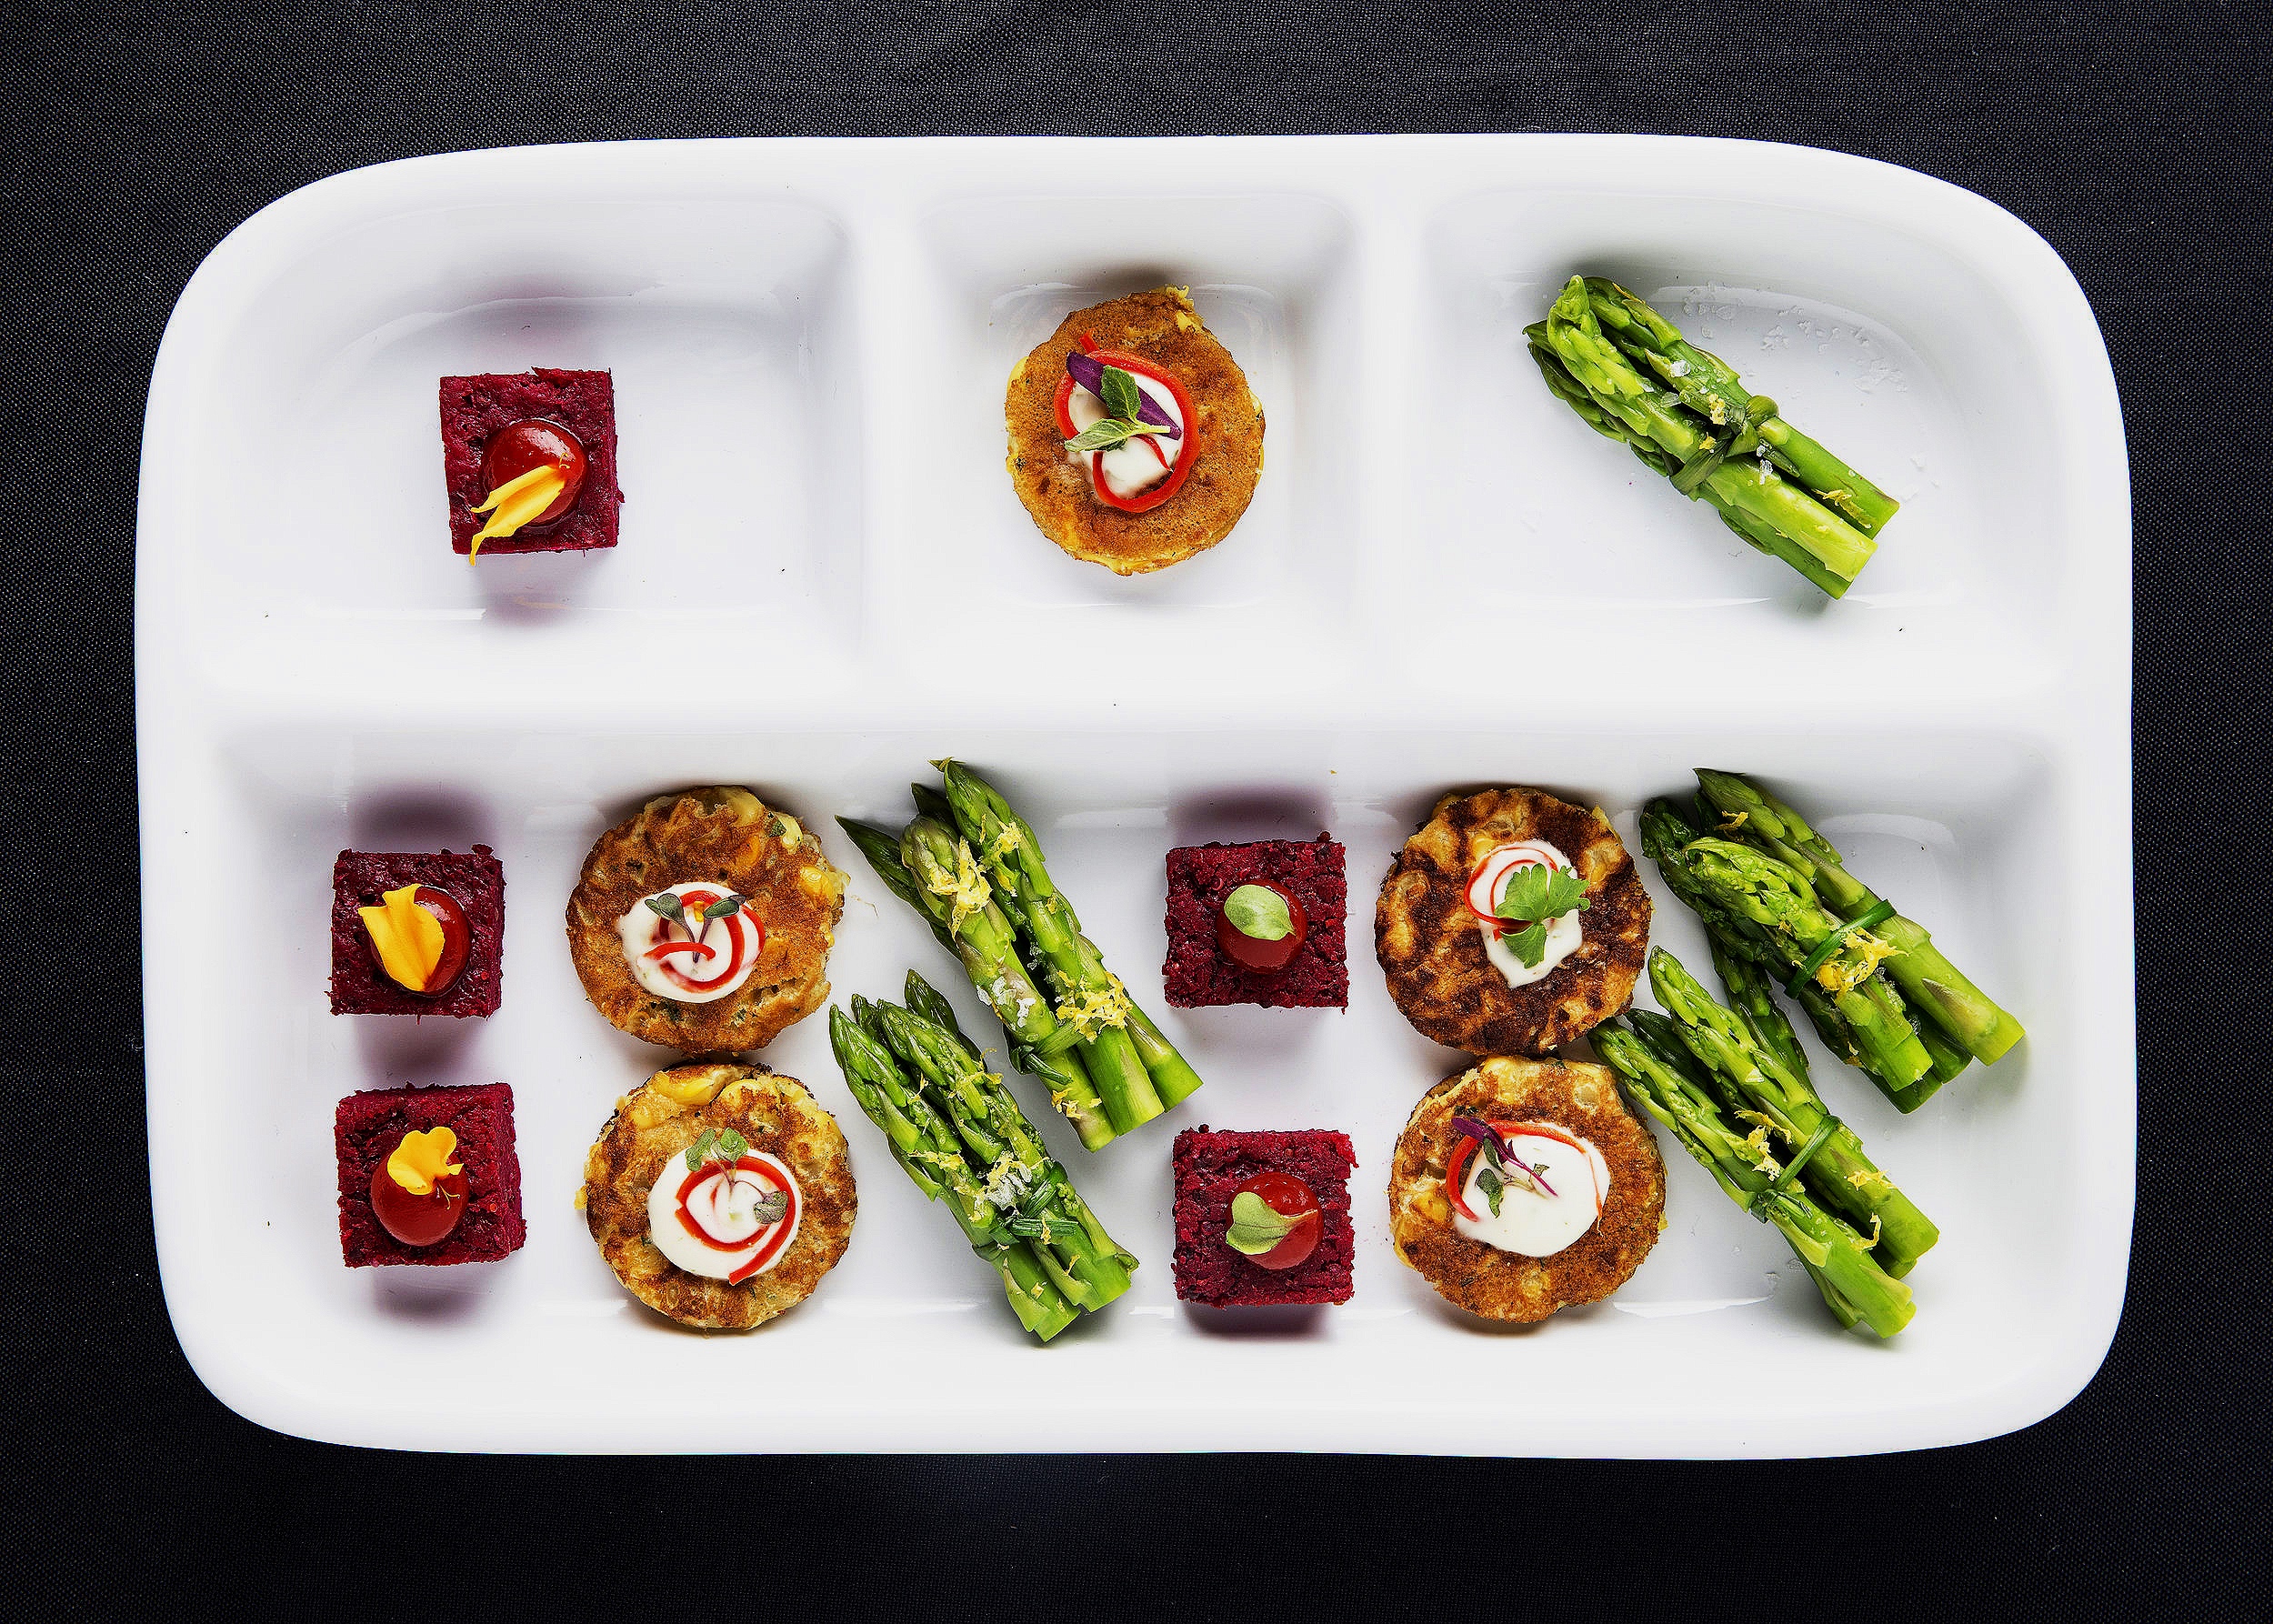 Vegan tv dinner with beetloaf, corn fritter with vegan aioli and anaheim chile, and asparagus